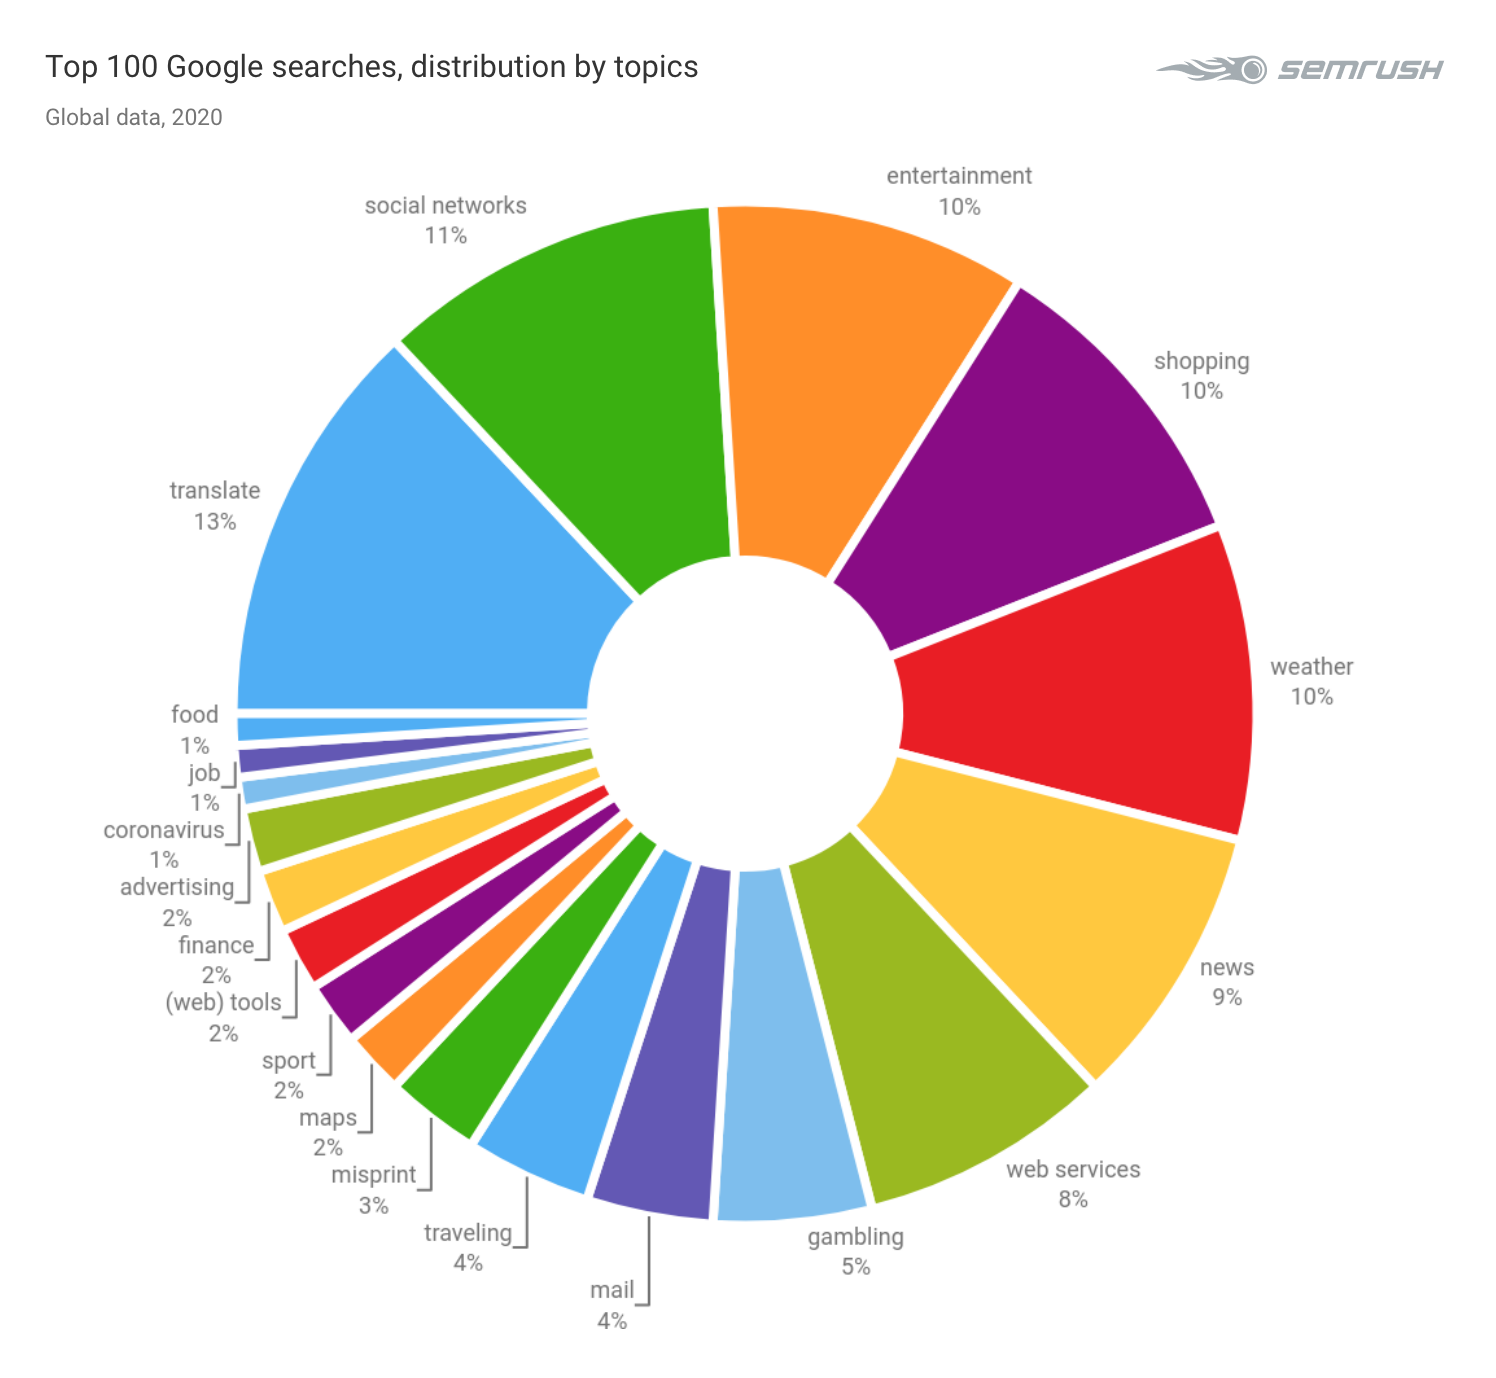 Top 100 Google searches, distribution by topics